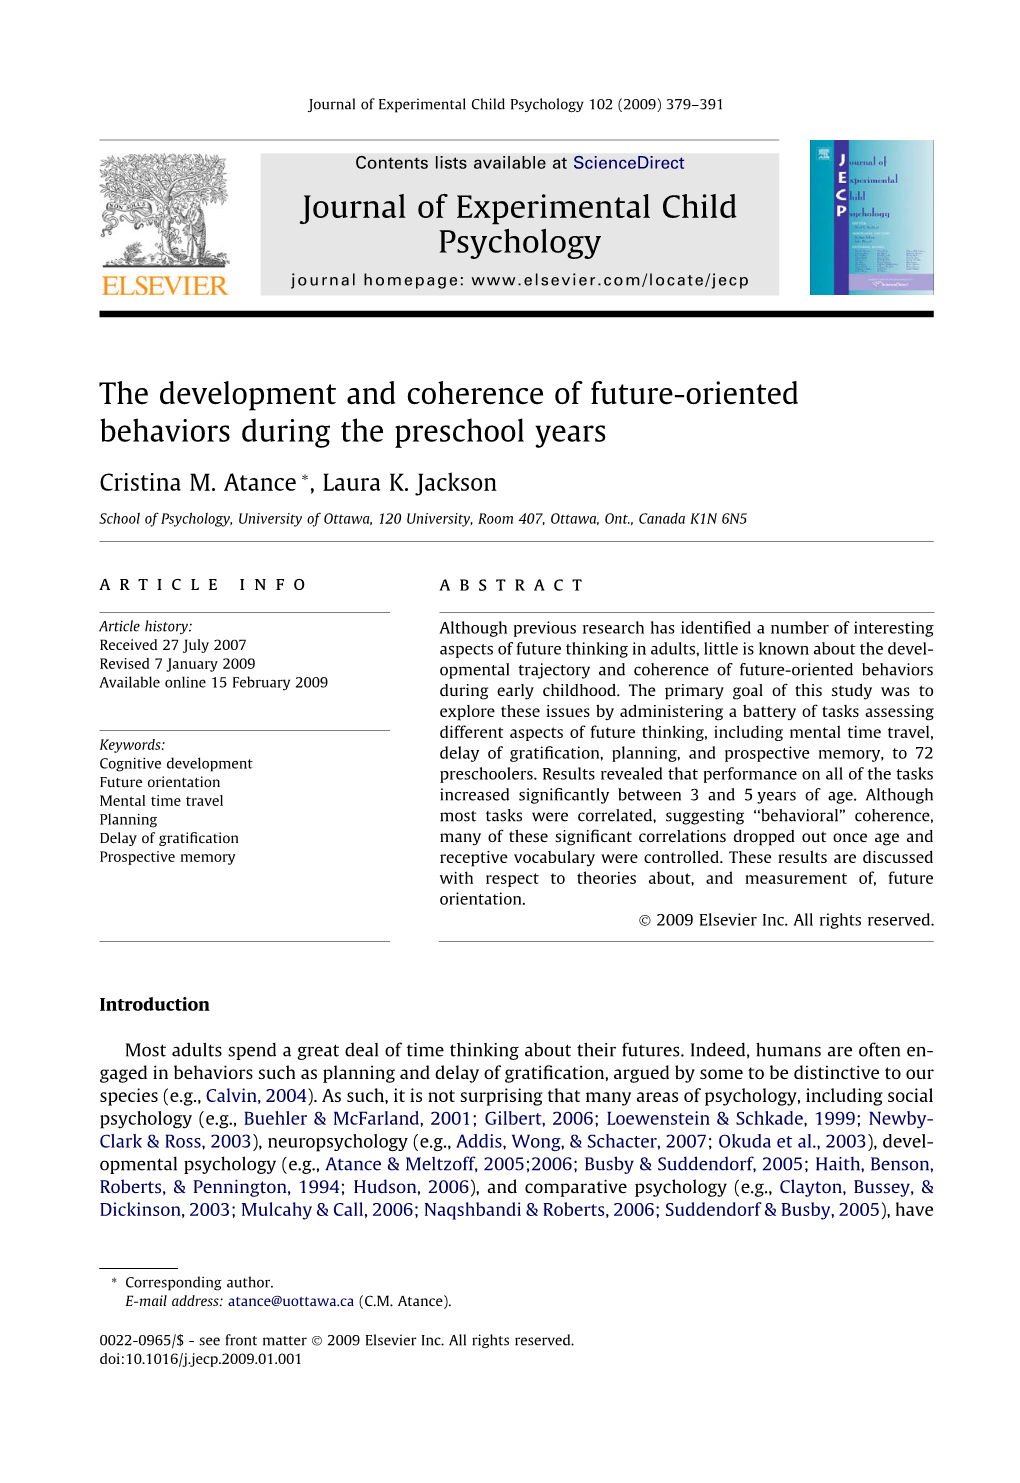 The Development and Coherence of Future-Oriented Behaviors During the Preschool Years